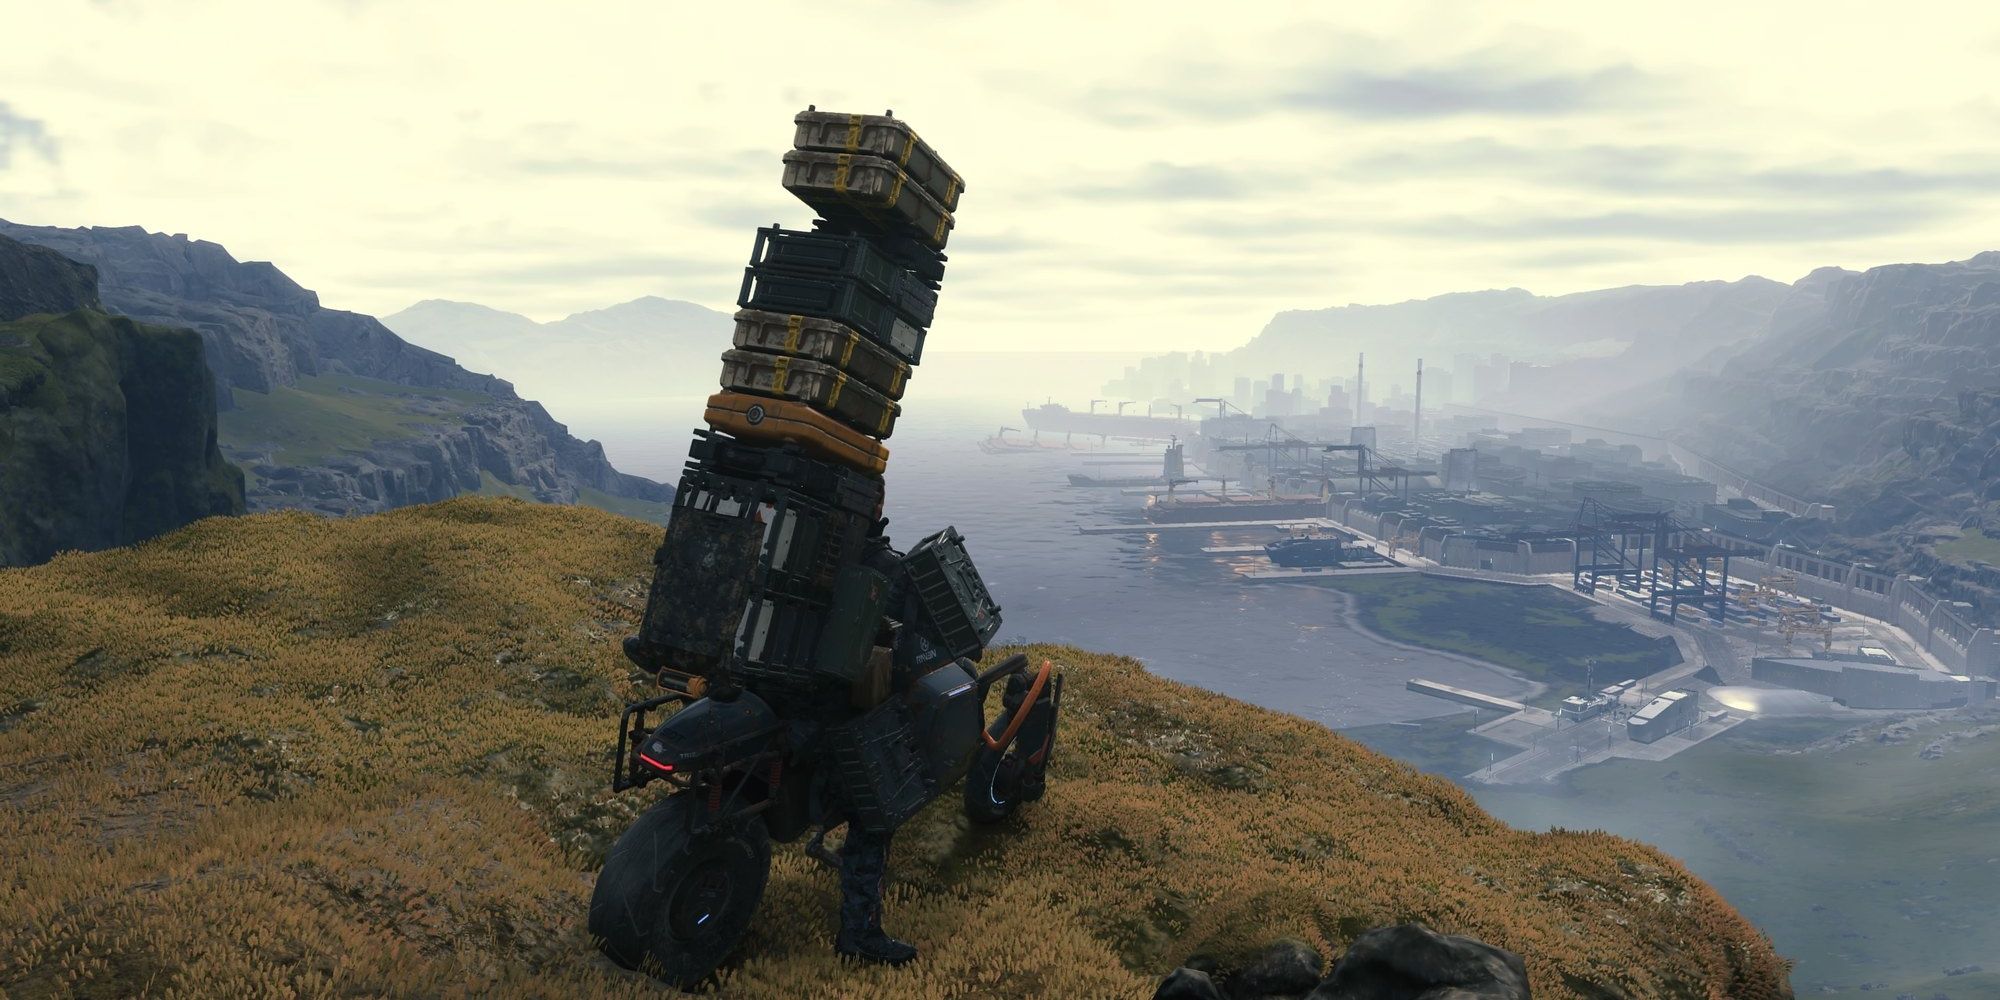 Sam on the reverse trike on a hill overlooking Port Knot City with lots of cargo on his back